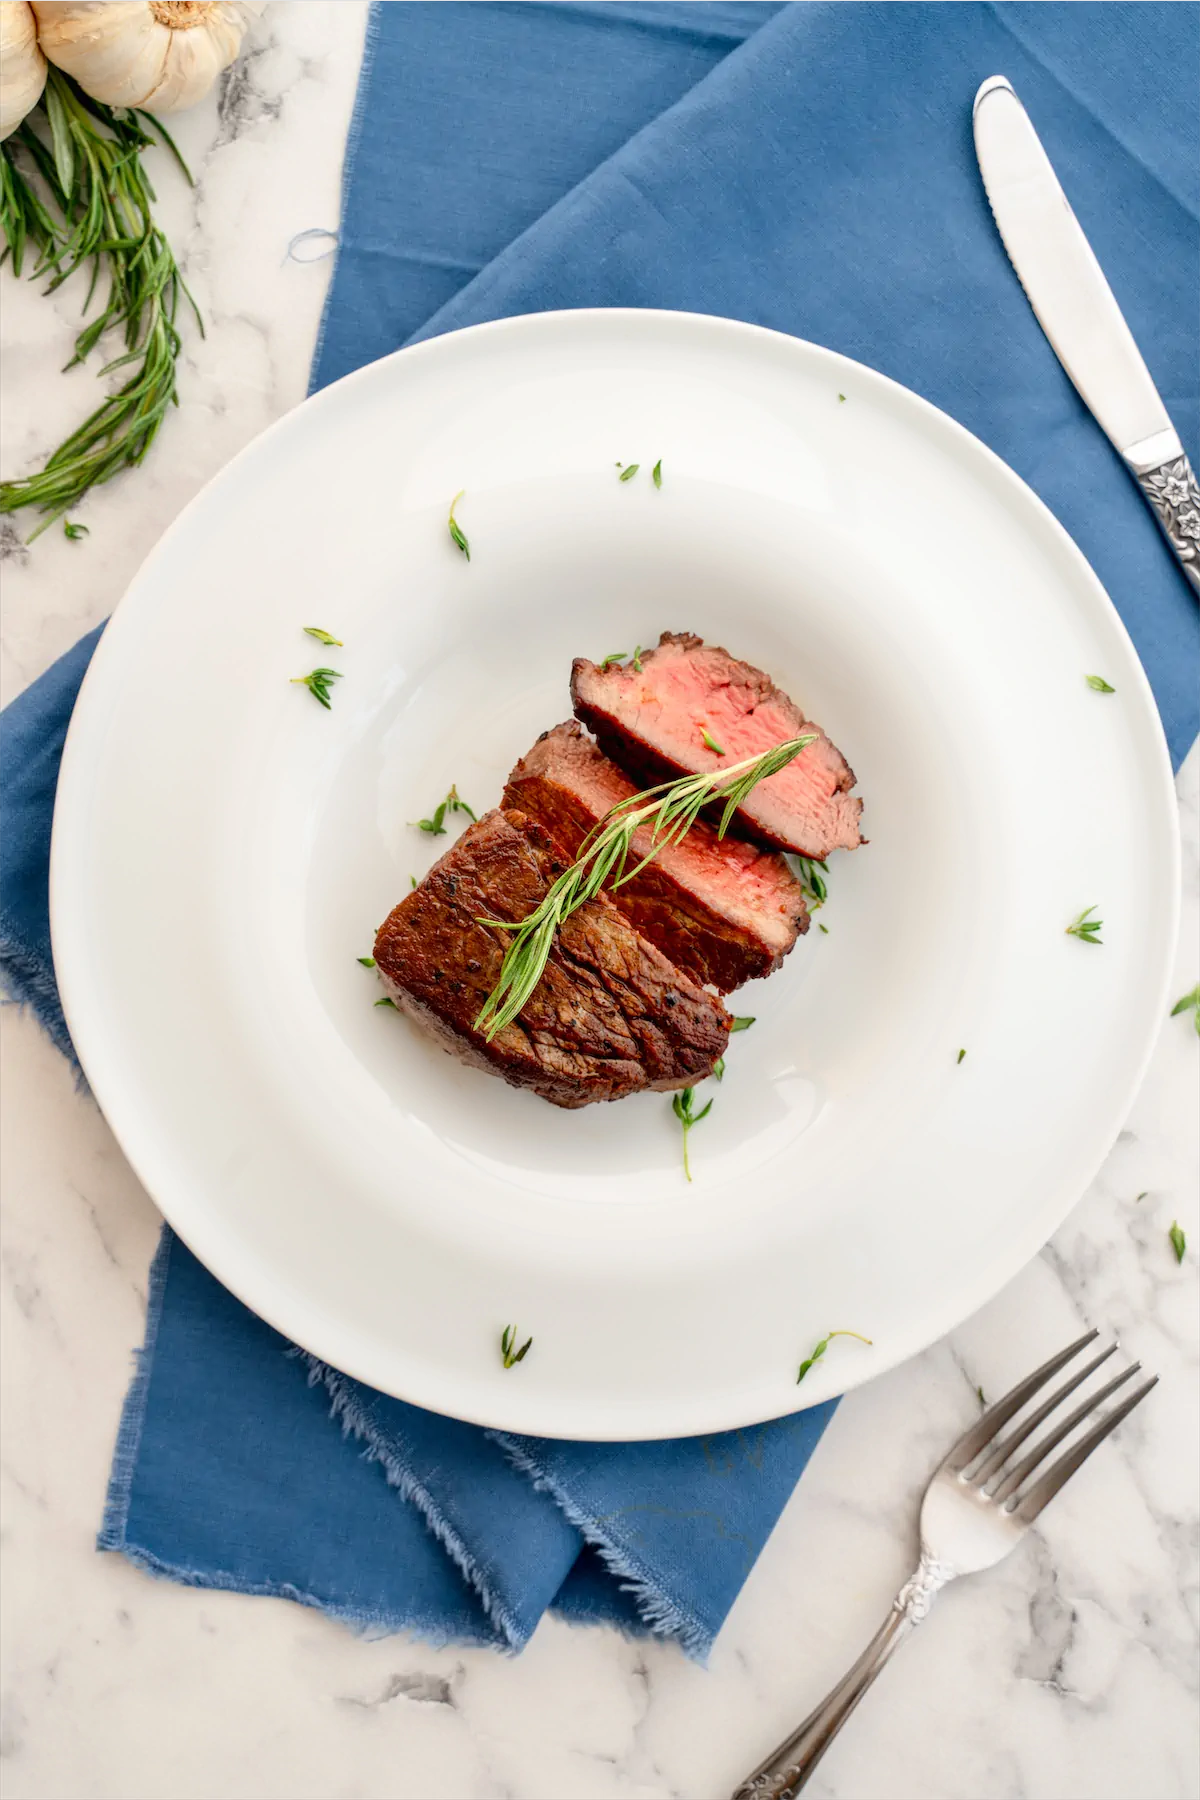 Slices of filet mignon on a plate, garnished with herbs.